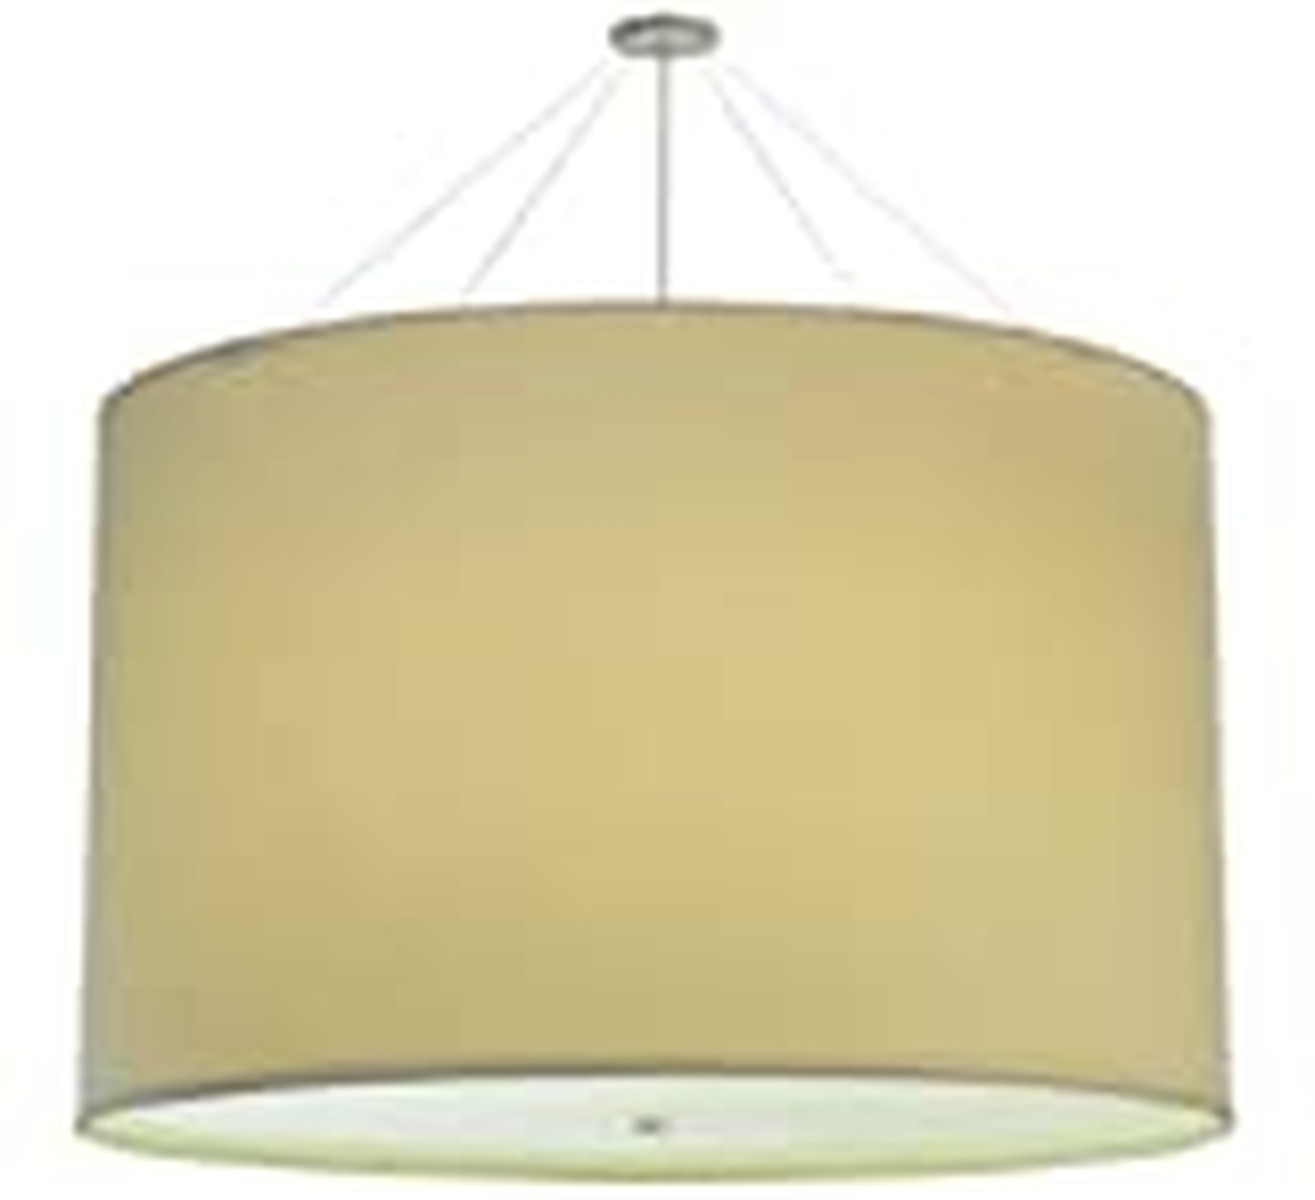 48"W Cilindro Natural Textrene Pendant